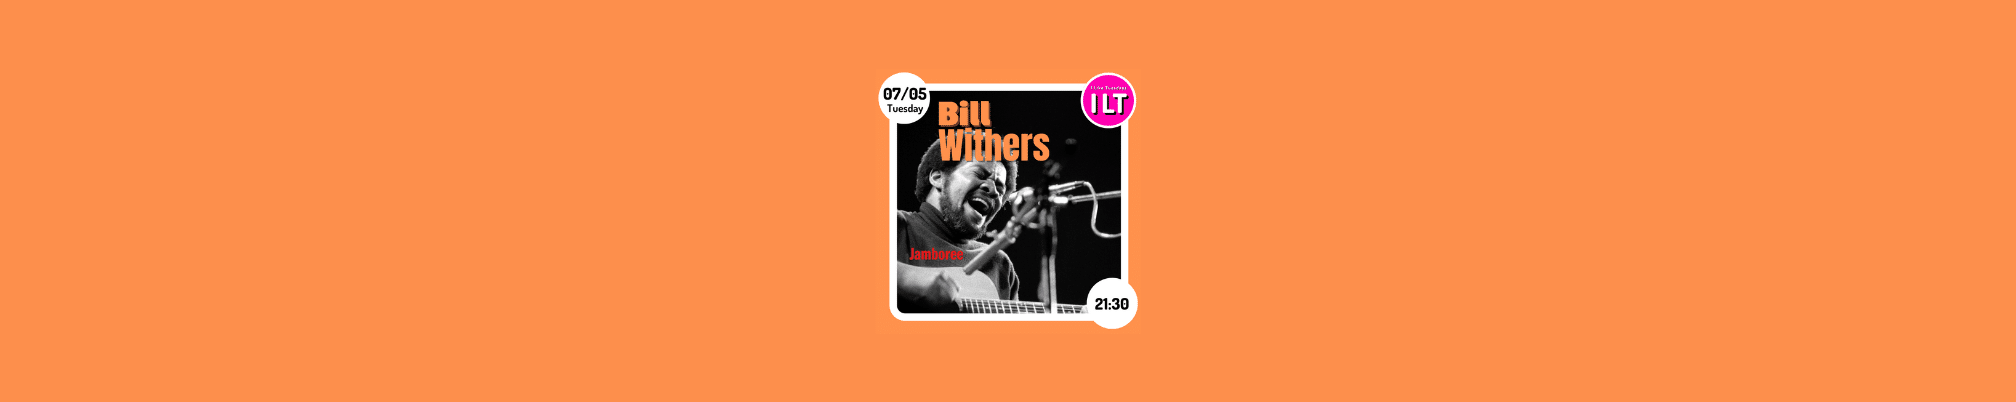 ILT Concerts & Jam - Bill Withers